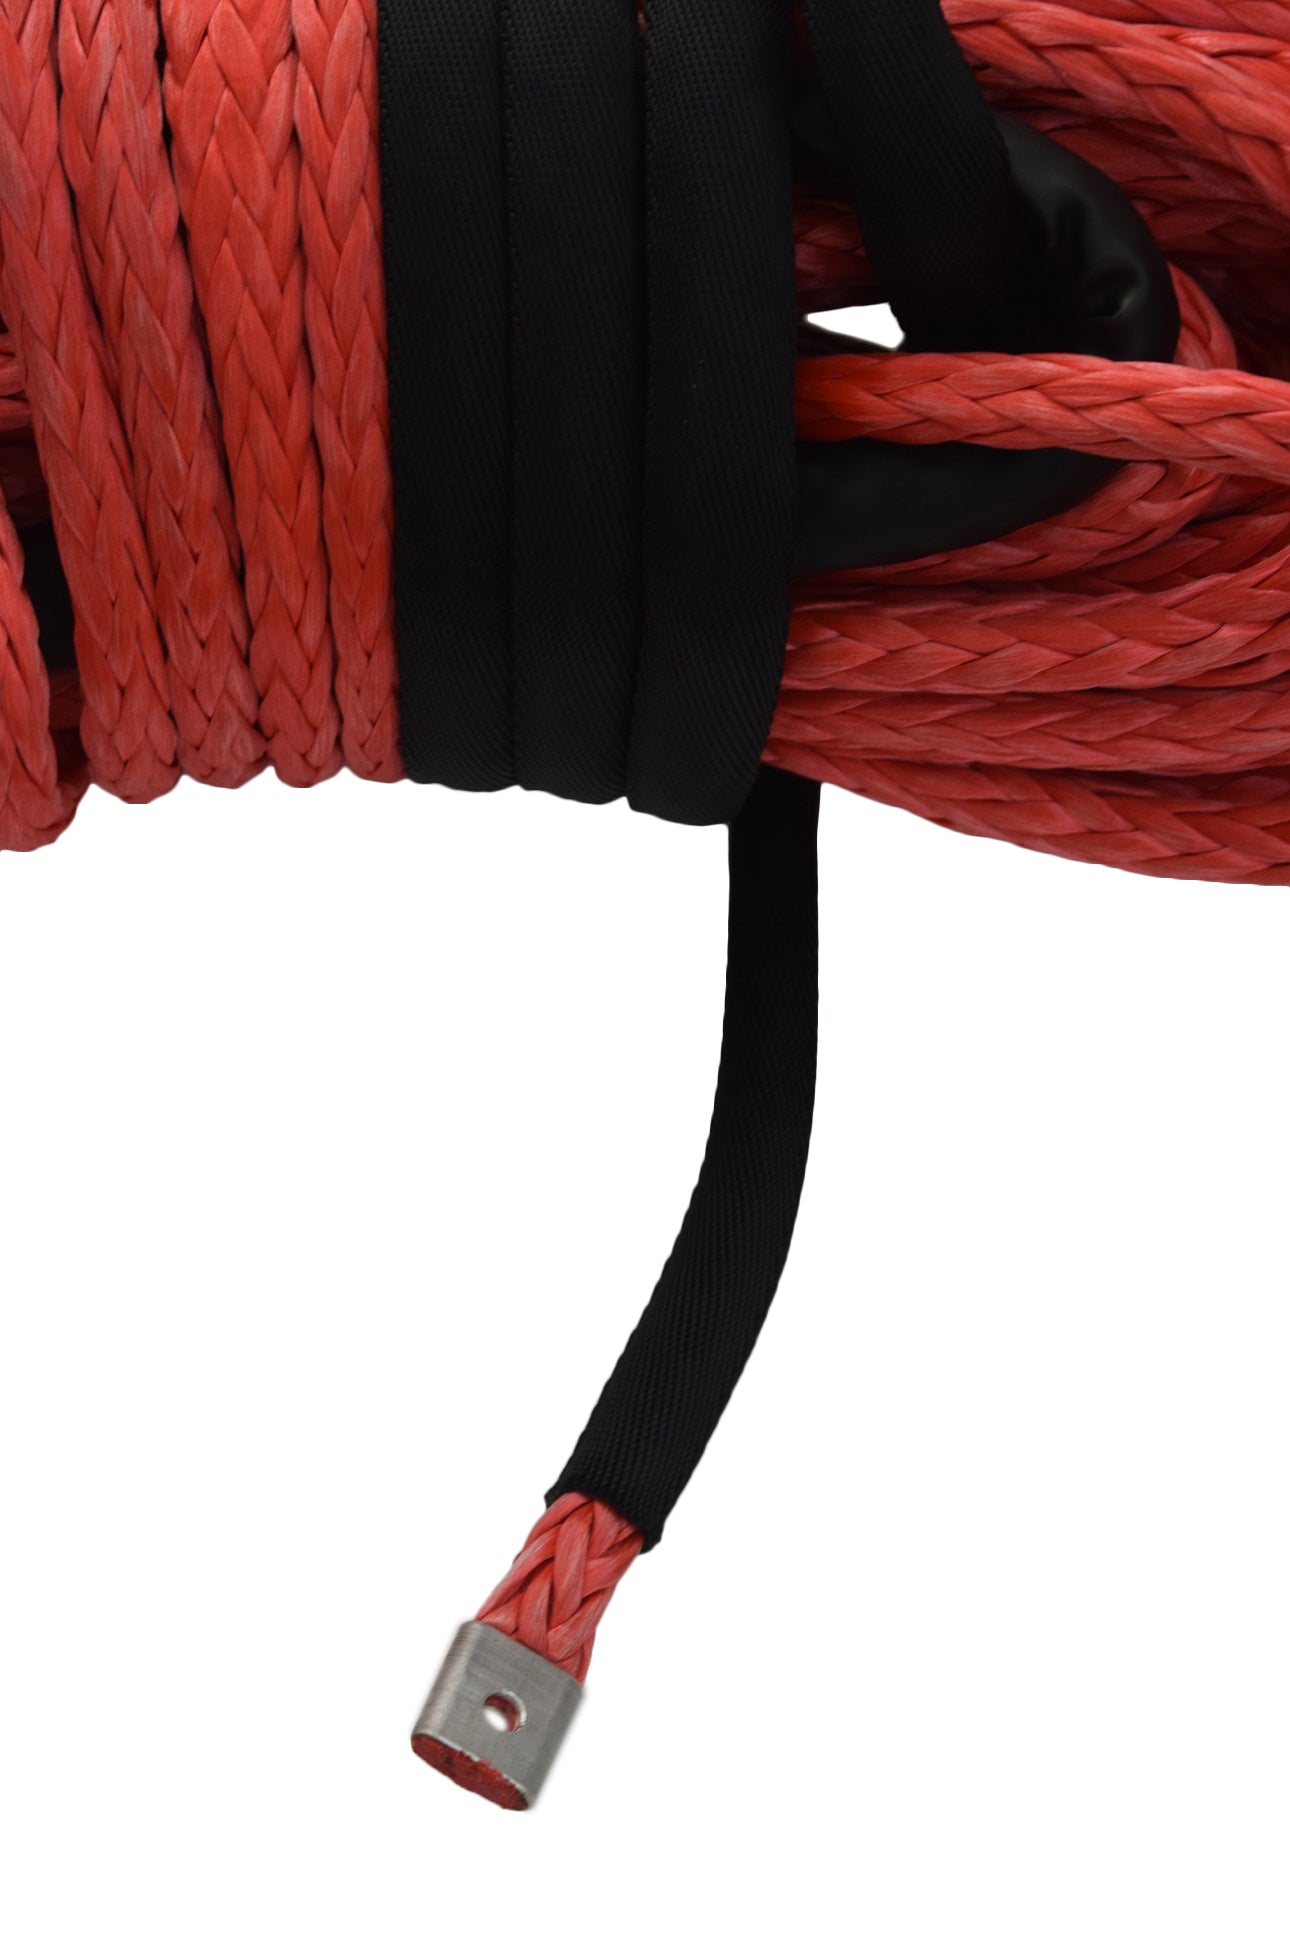 14mm*45m Red Synthetic Winch Rope with Hook,ATV Winch Cable, Offroad Rope